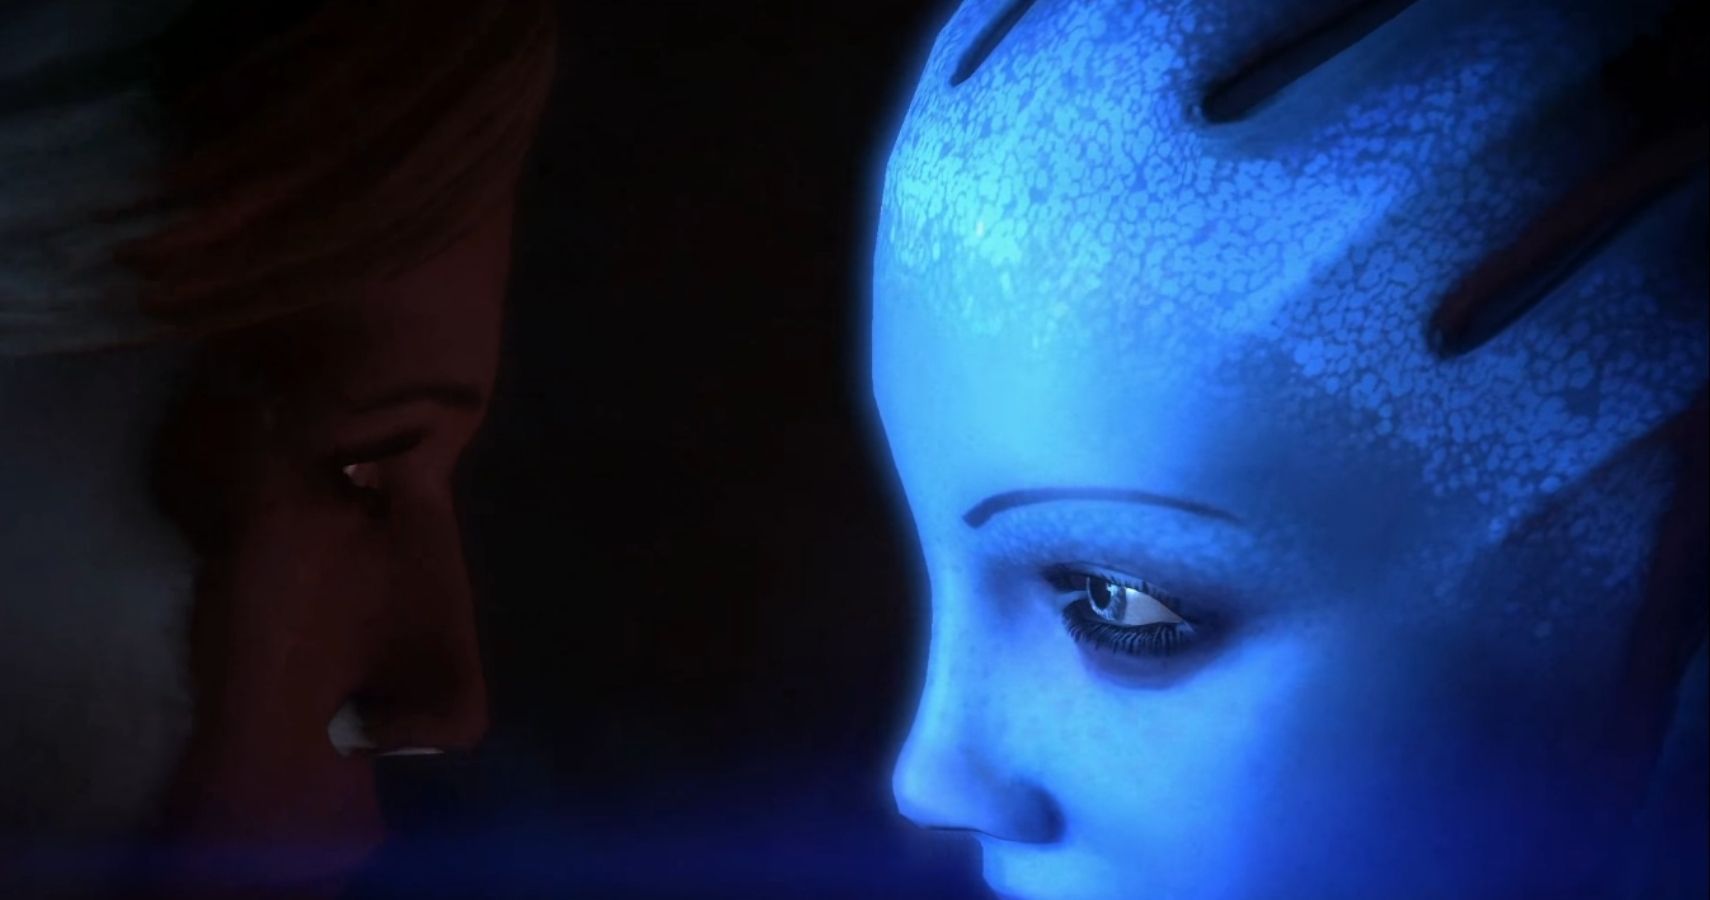 A close shot of Commander Shepard and Liara, a blue alien, face-to-face